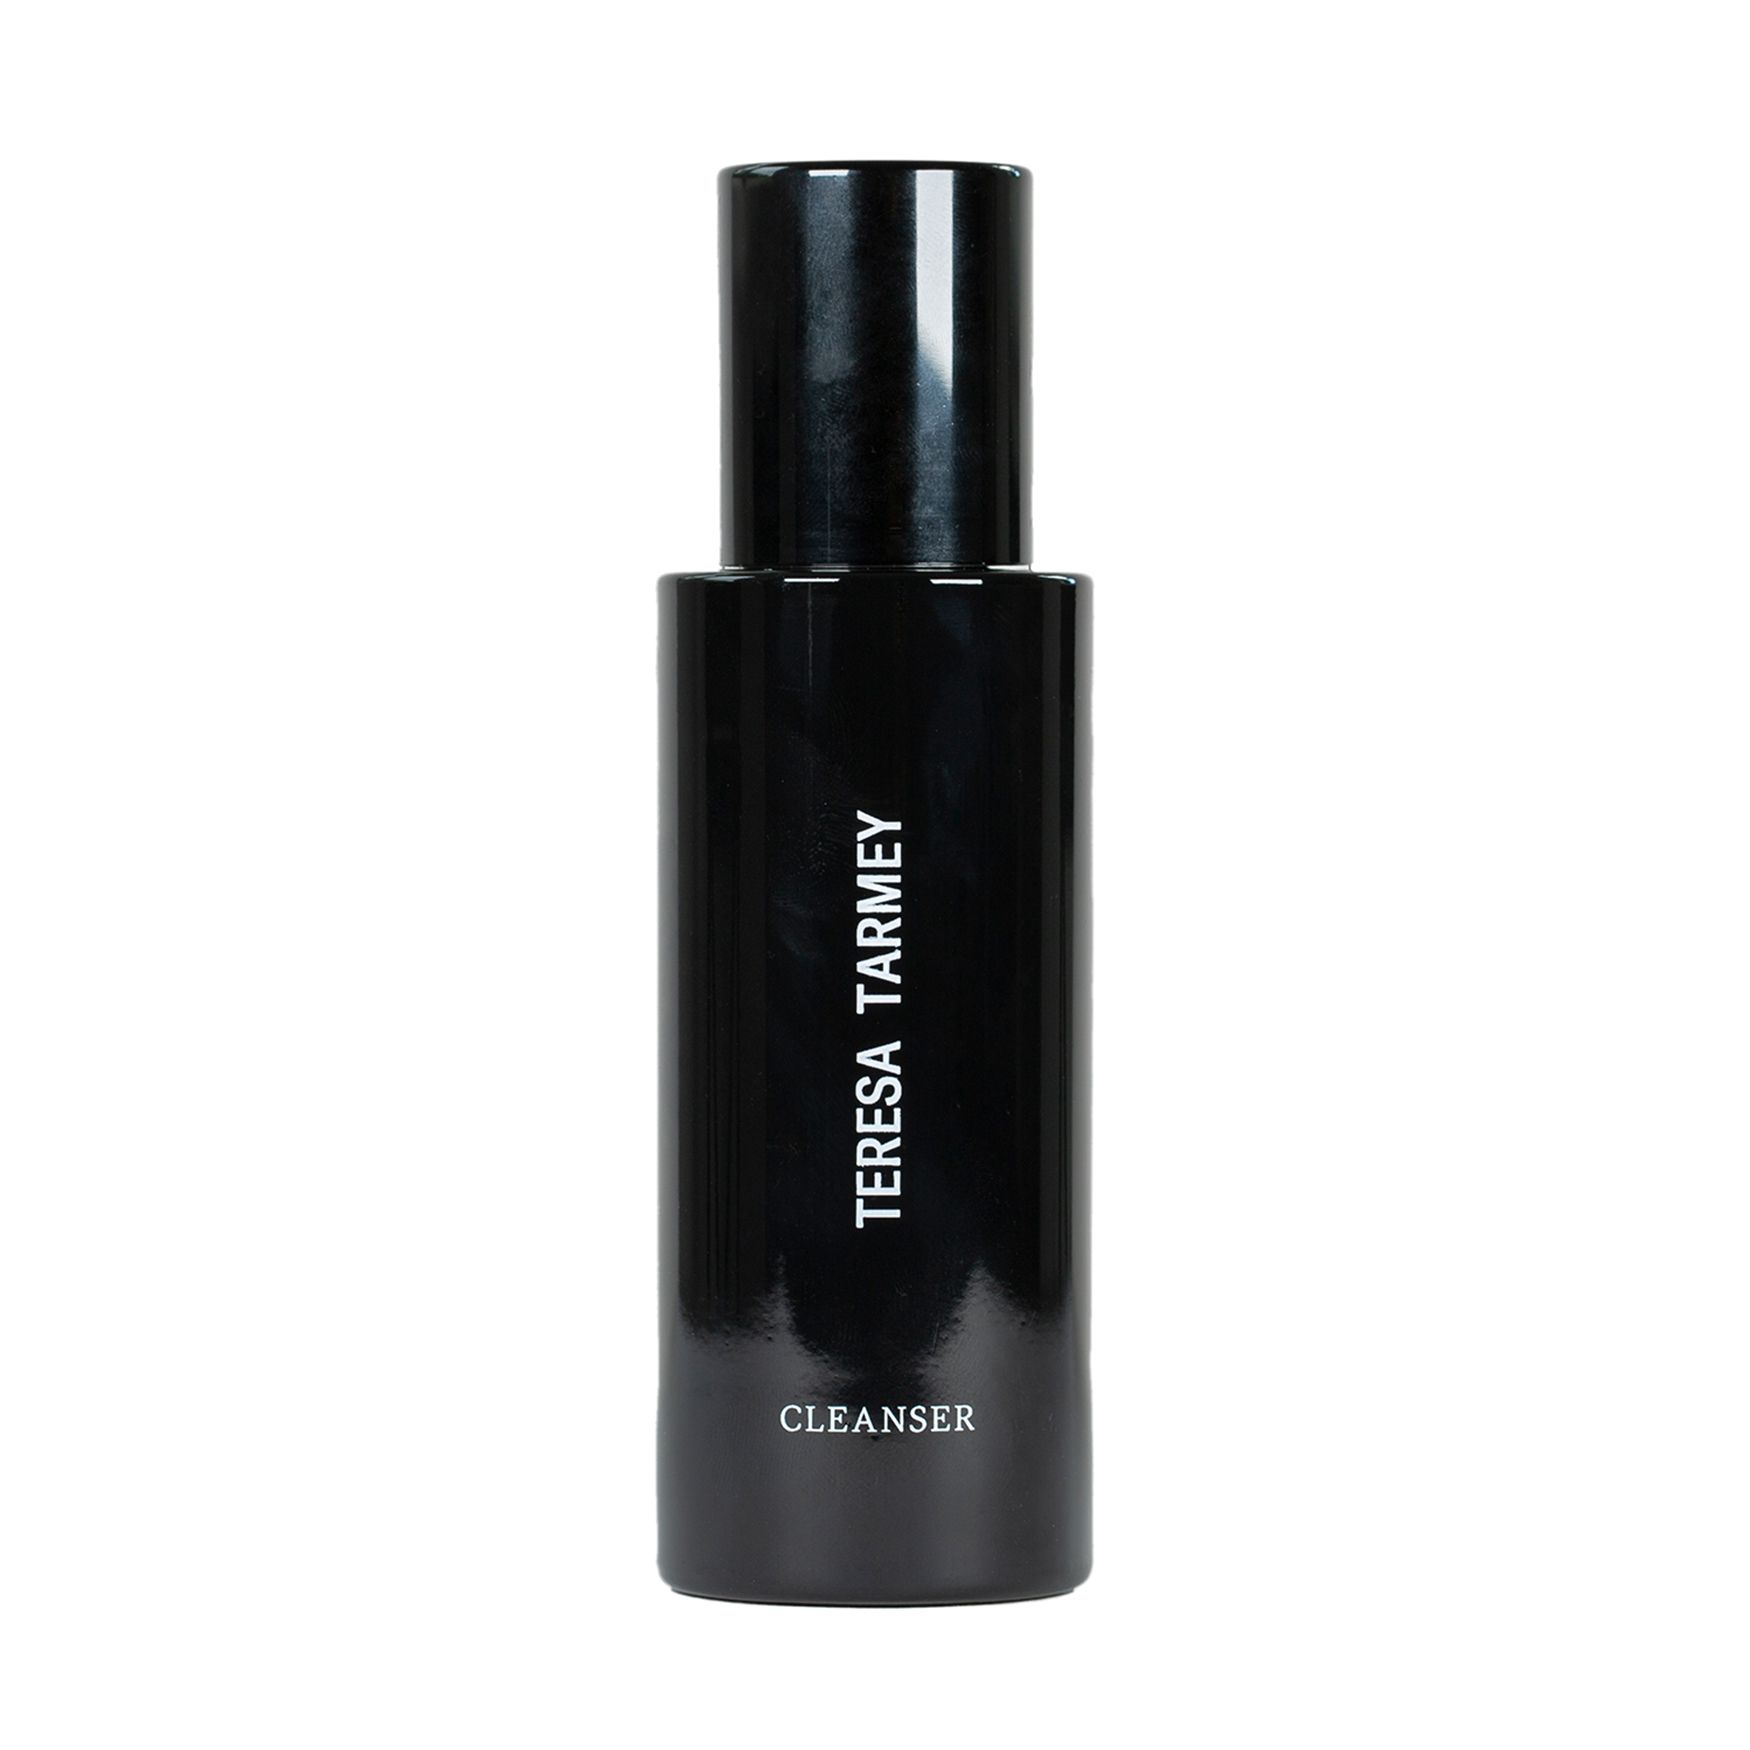 Cleanser | Space NK - USA